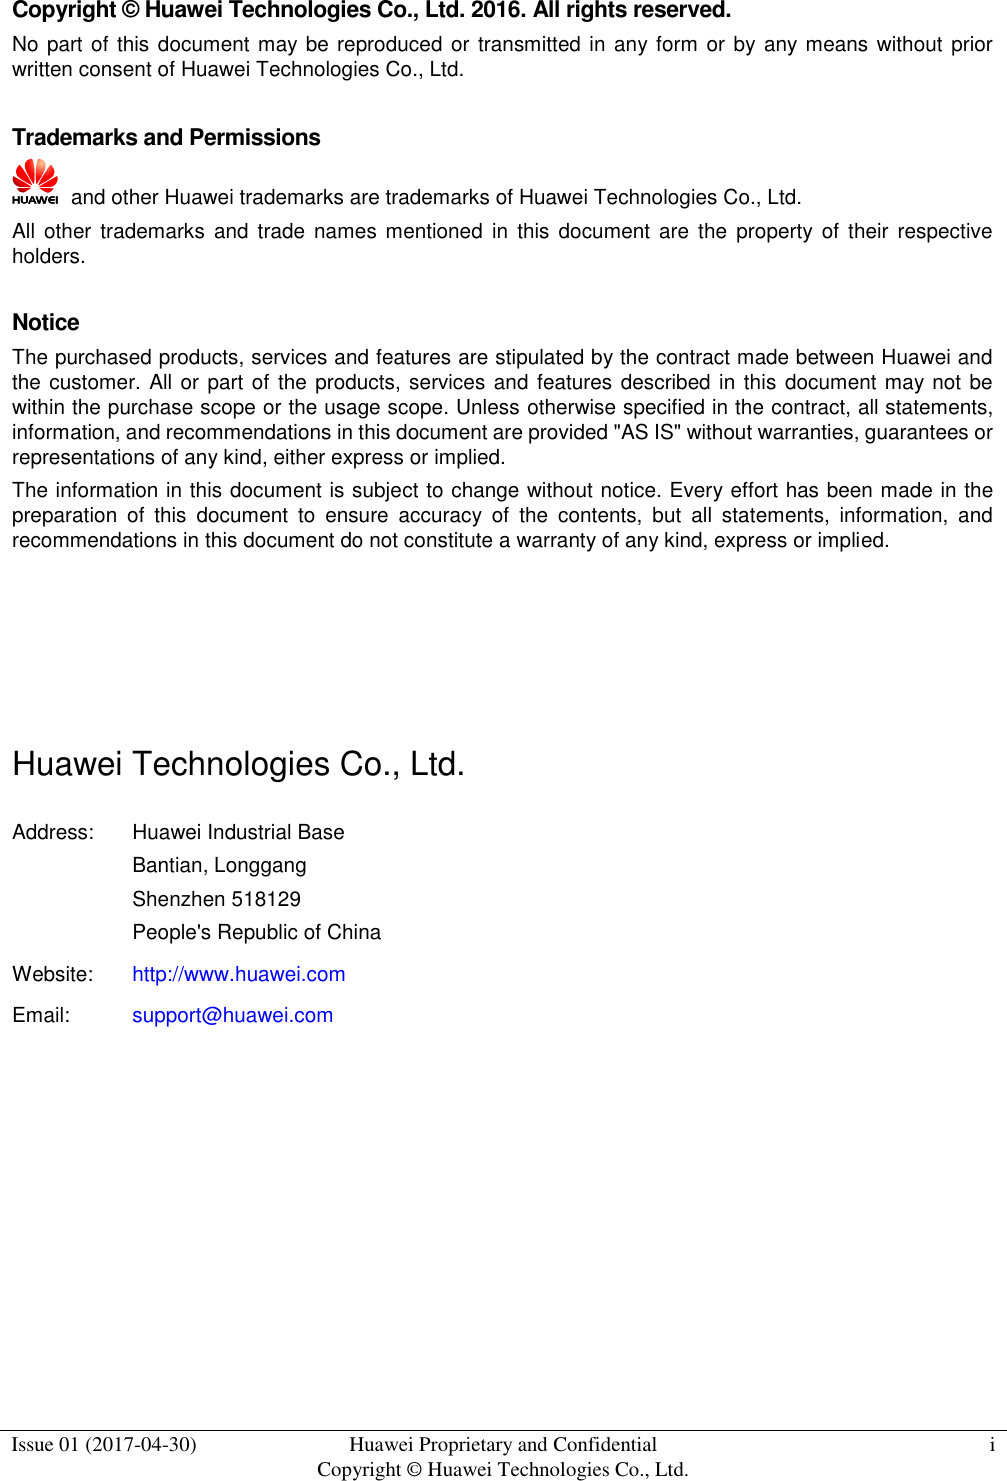  Issue 01 (2017-04-30) Huawei Proprietary and Confidential                                     Copyright © Huawei Technologies Co., Ltd. i    Copyright © Huawei Technologies Co., Ltd. 2016. All rights reserved. No part of this document may be reproduced or transmitted in any form or by any means without prior written consent of Huawei Technologies Co., Ltd.  Trademarks and Permissions   and other Huawei trademarks are trademarks of Huawei Technologies Co., Ltd. All other trademarks  and trade names  mentioned in  this document  are  the  property  of  their respective holders.  Notice The purchased products, services and features are stipulated by the contract made between Huawei and the customer.  All or part of the products, services and features described in this document may not be within the purchase scope or the usage scope. Unless otherwise specified in the contract, all statements, information, and recommendations in this document are provided &quot;AS IS&quot; without warranties, guarantees or representations of any kind, either express or implied. The information in this document is subject to change without notice. Every effort has been made in the preparation  of  this  document  to  ensure  accuracy  of  the  contents,  but  all  statements,  information,  and recommendations in this document do not constitute a warranty of any kind, express or implied.     Huawei Technologies Co., Ltd. Address: Huawei Industrial Base Bantian, Longgang Shenzhen 518129 People&apos;s Republic of China Website: http://www.huawei.com Email: support@huawei.com          